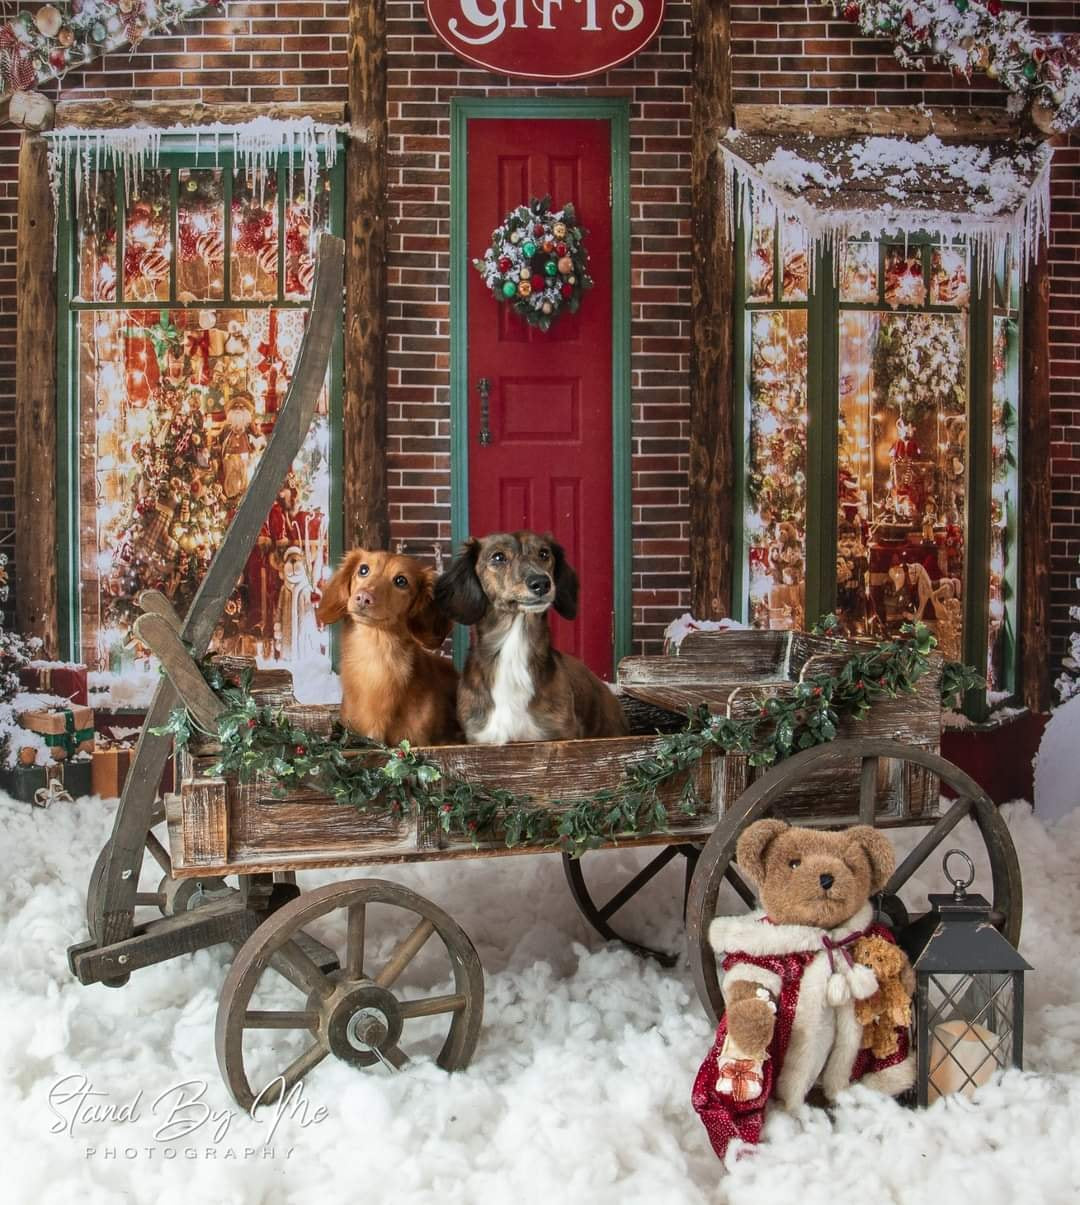 Kate Christmas Giftshop Decorations Snow Backdrop for Photography